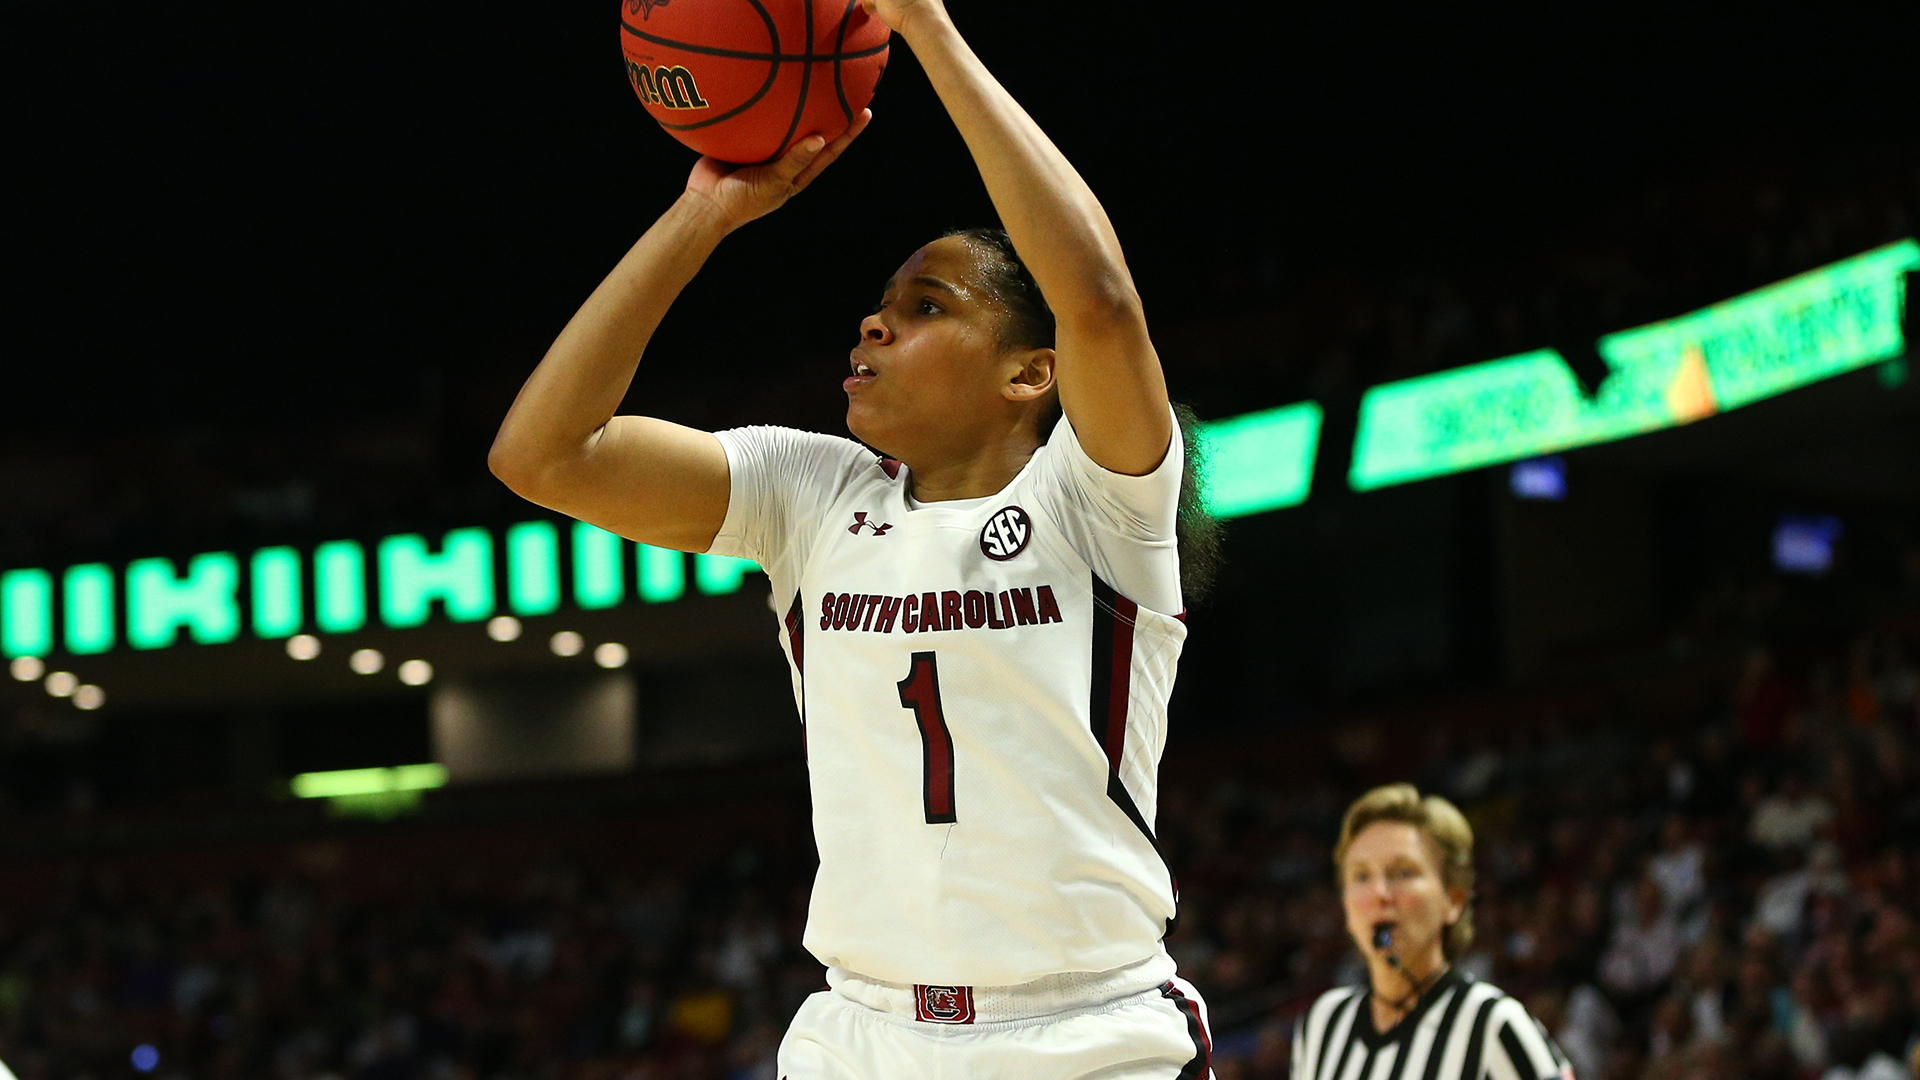 Cooke leads South Carolina to 5th place with 103-41 in victory over Temple – College Basketball